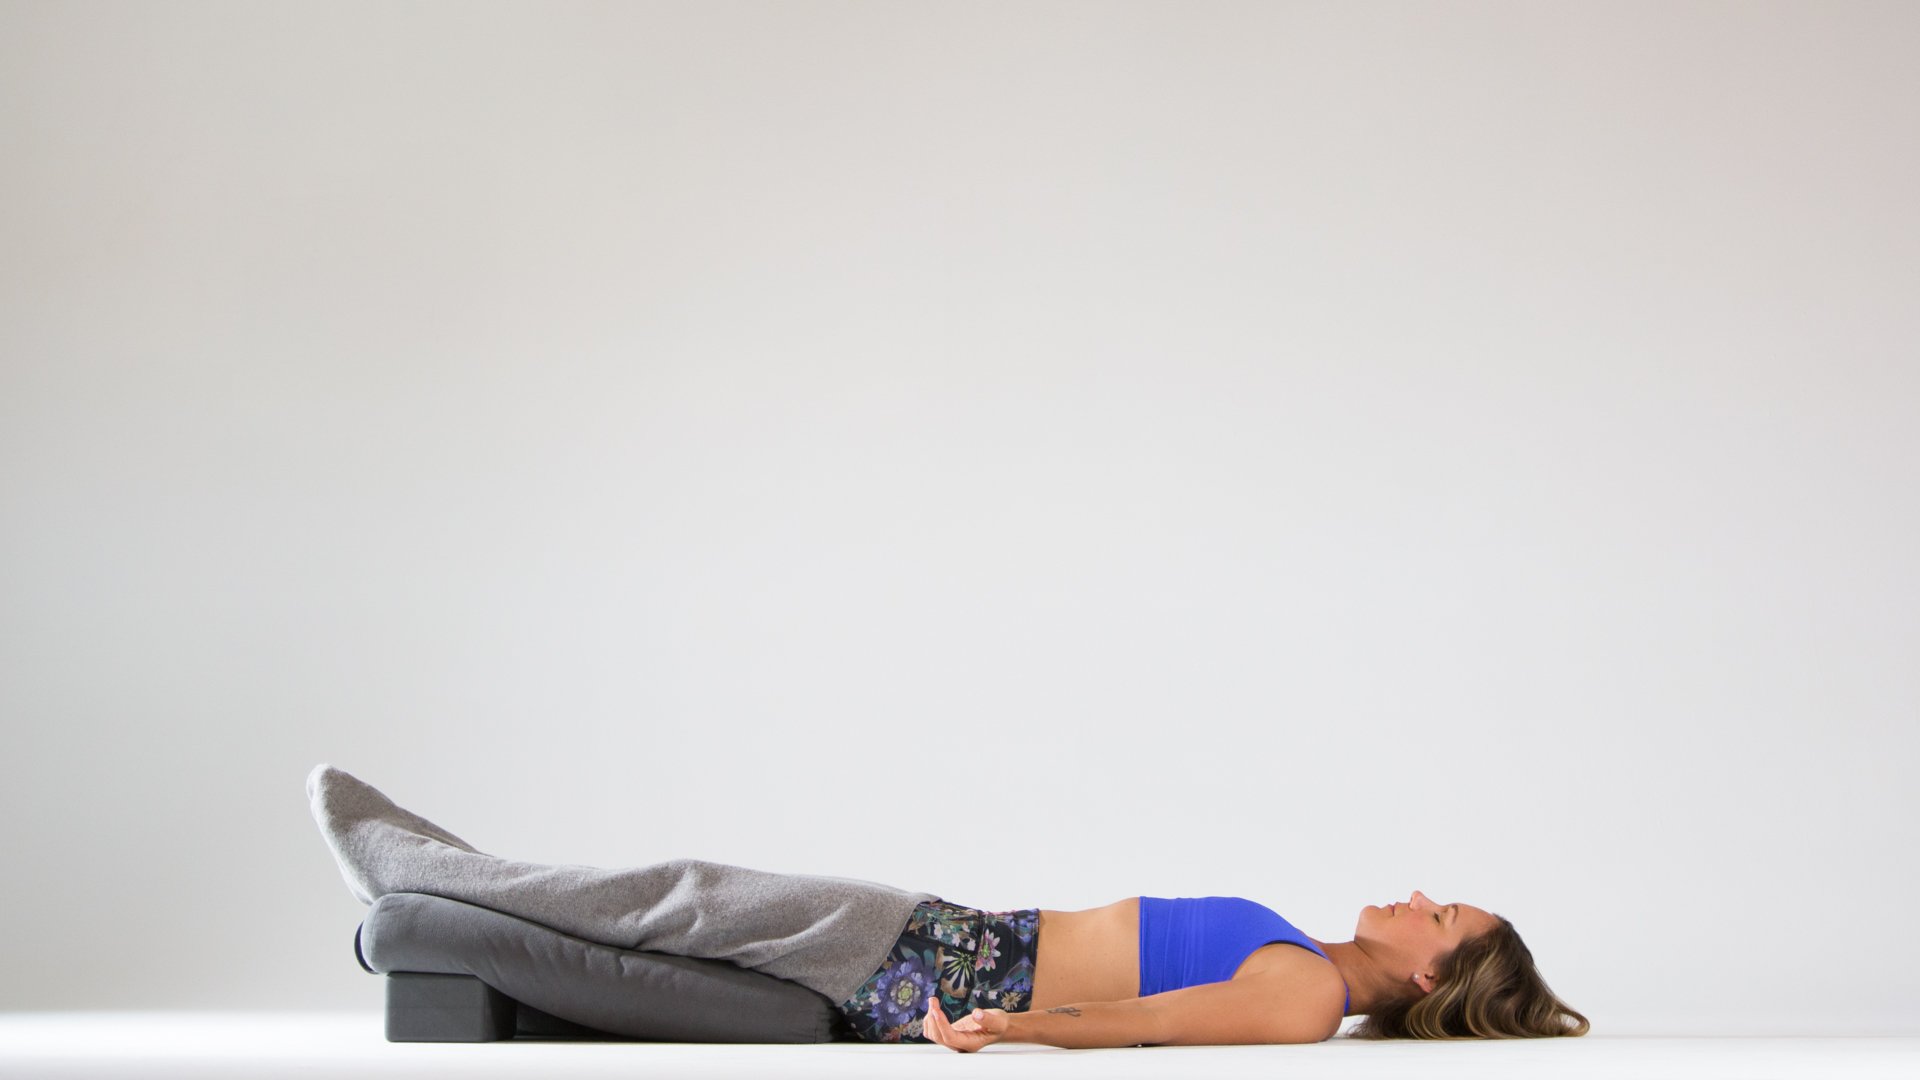 https://images.ctfassets.net/p0sybd6jir6r/5Yi0YlTuEfjcN5pl1Yg0uY/dae66317d05a685e5fa08ad1847a78d3/restorative-yoga-pose-with-legs-up-a-bolster-with-blanket-902d999b26079fc054203591b7481390.jpg